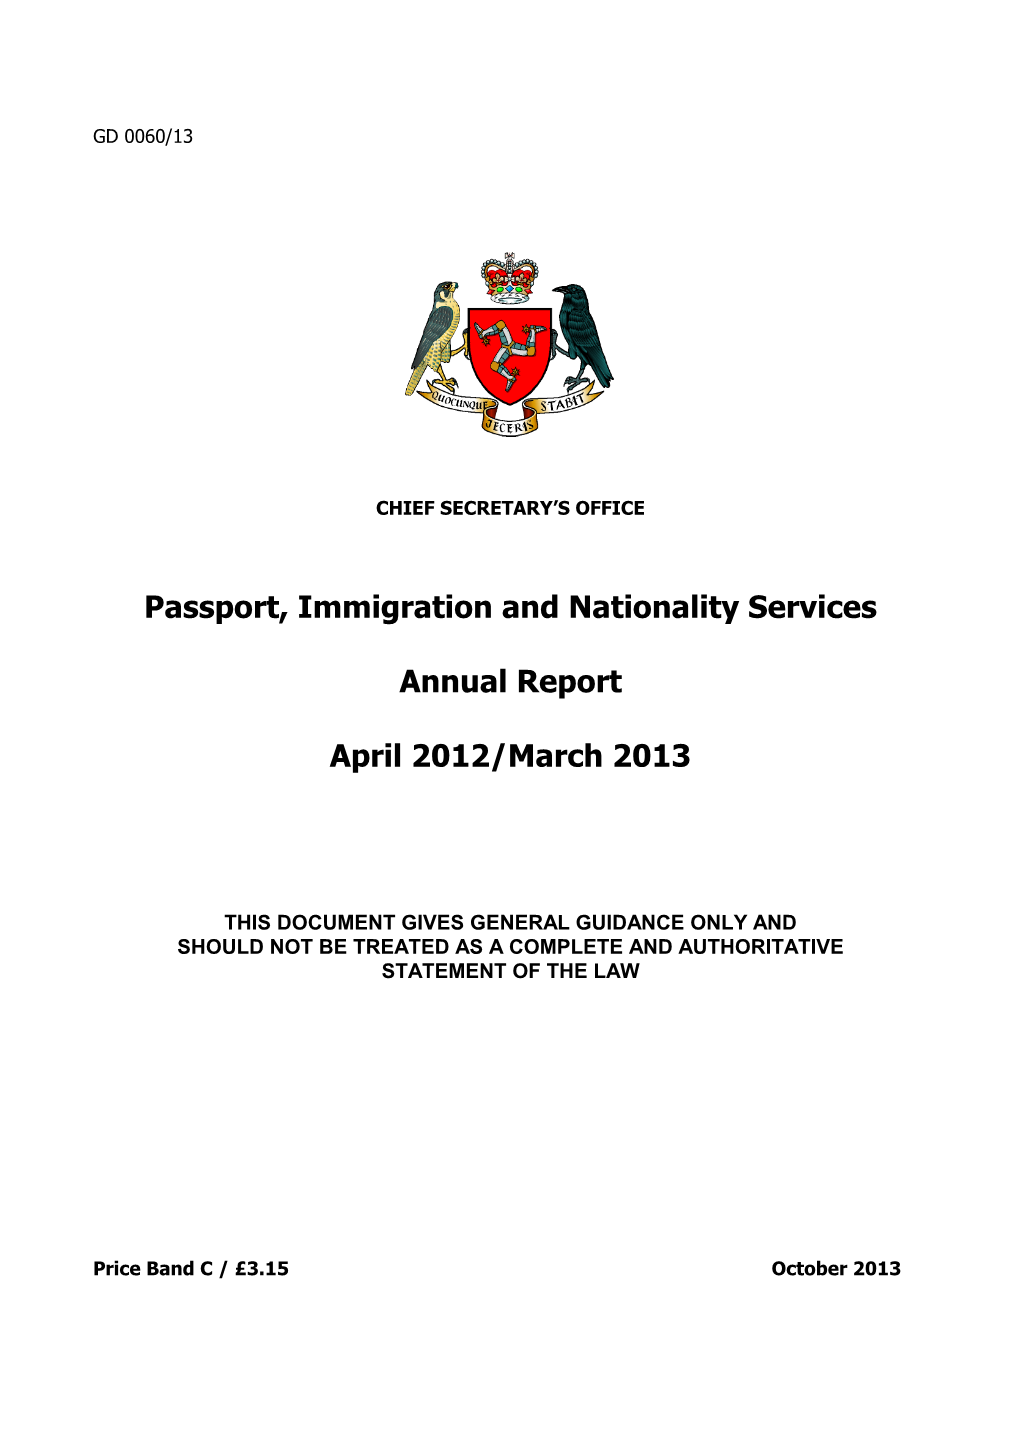 Passport, Immigration and Nationality Services Annual Report April 2012